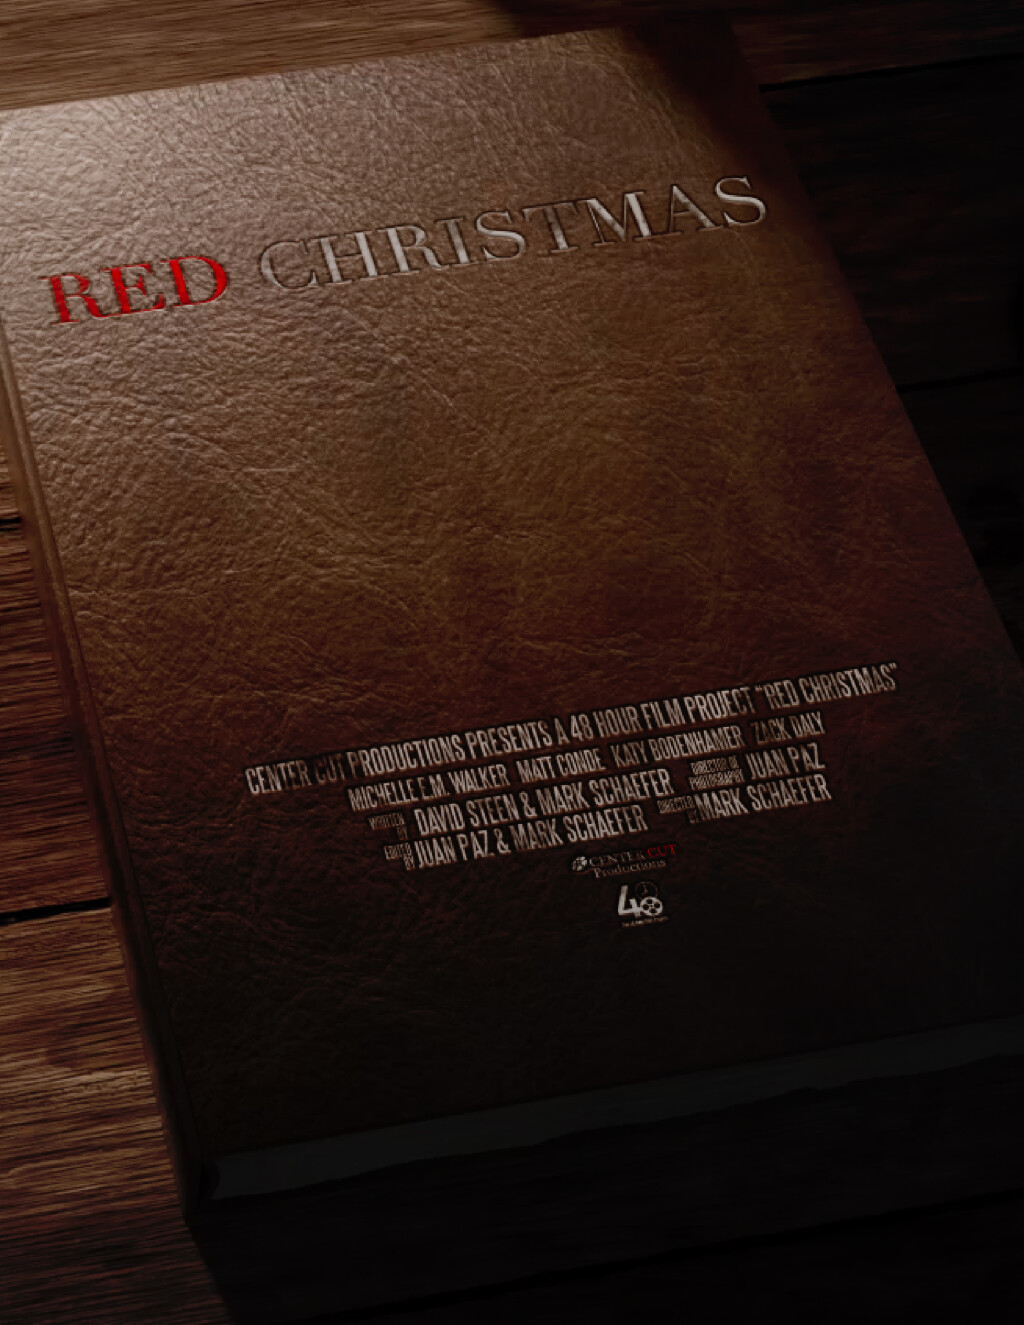 Filmposter for Red Christmas